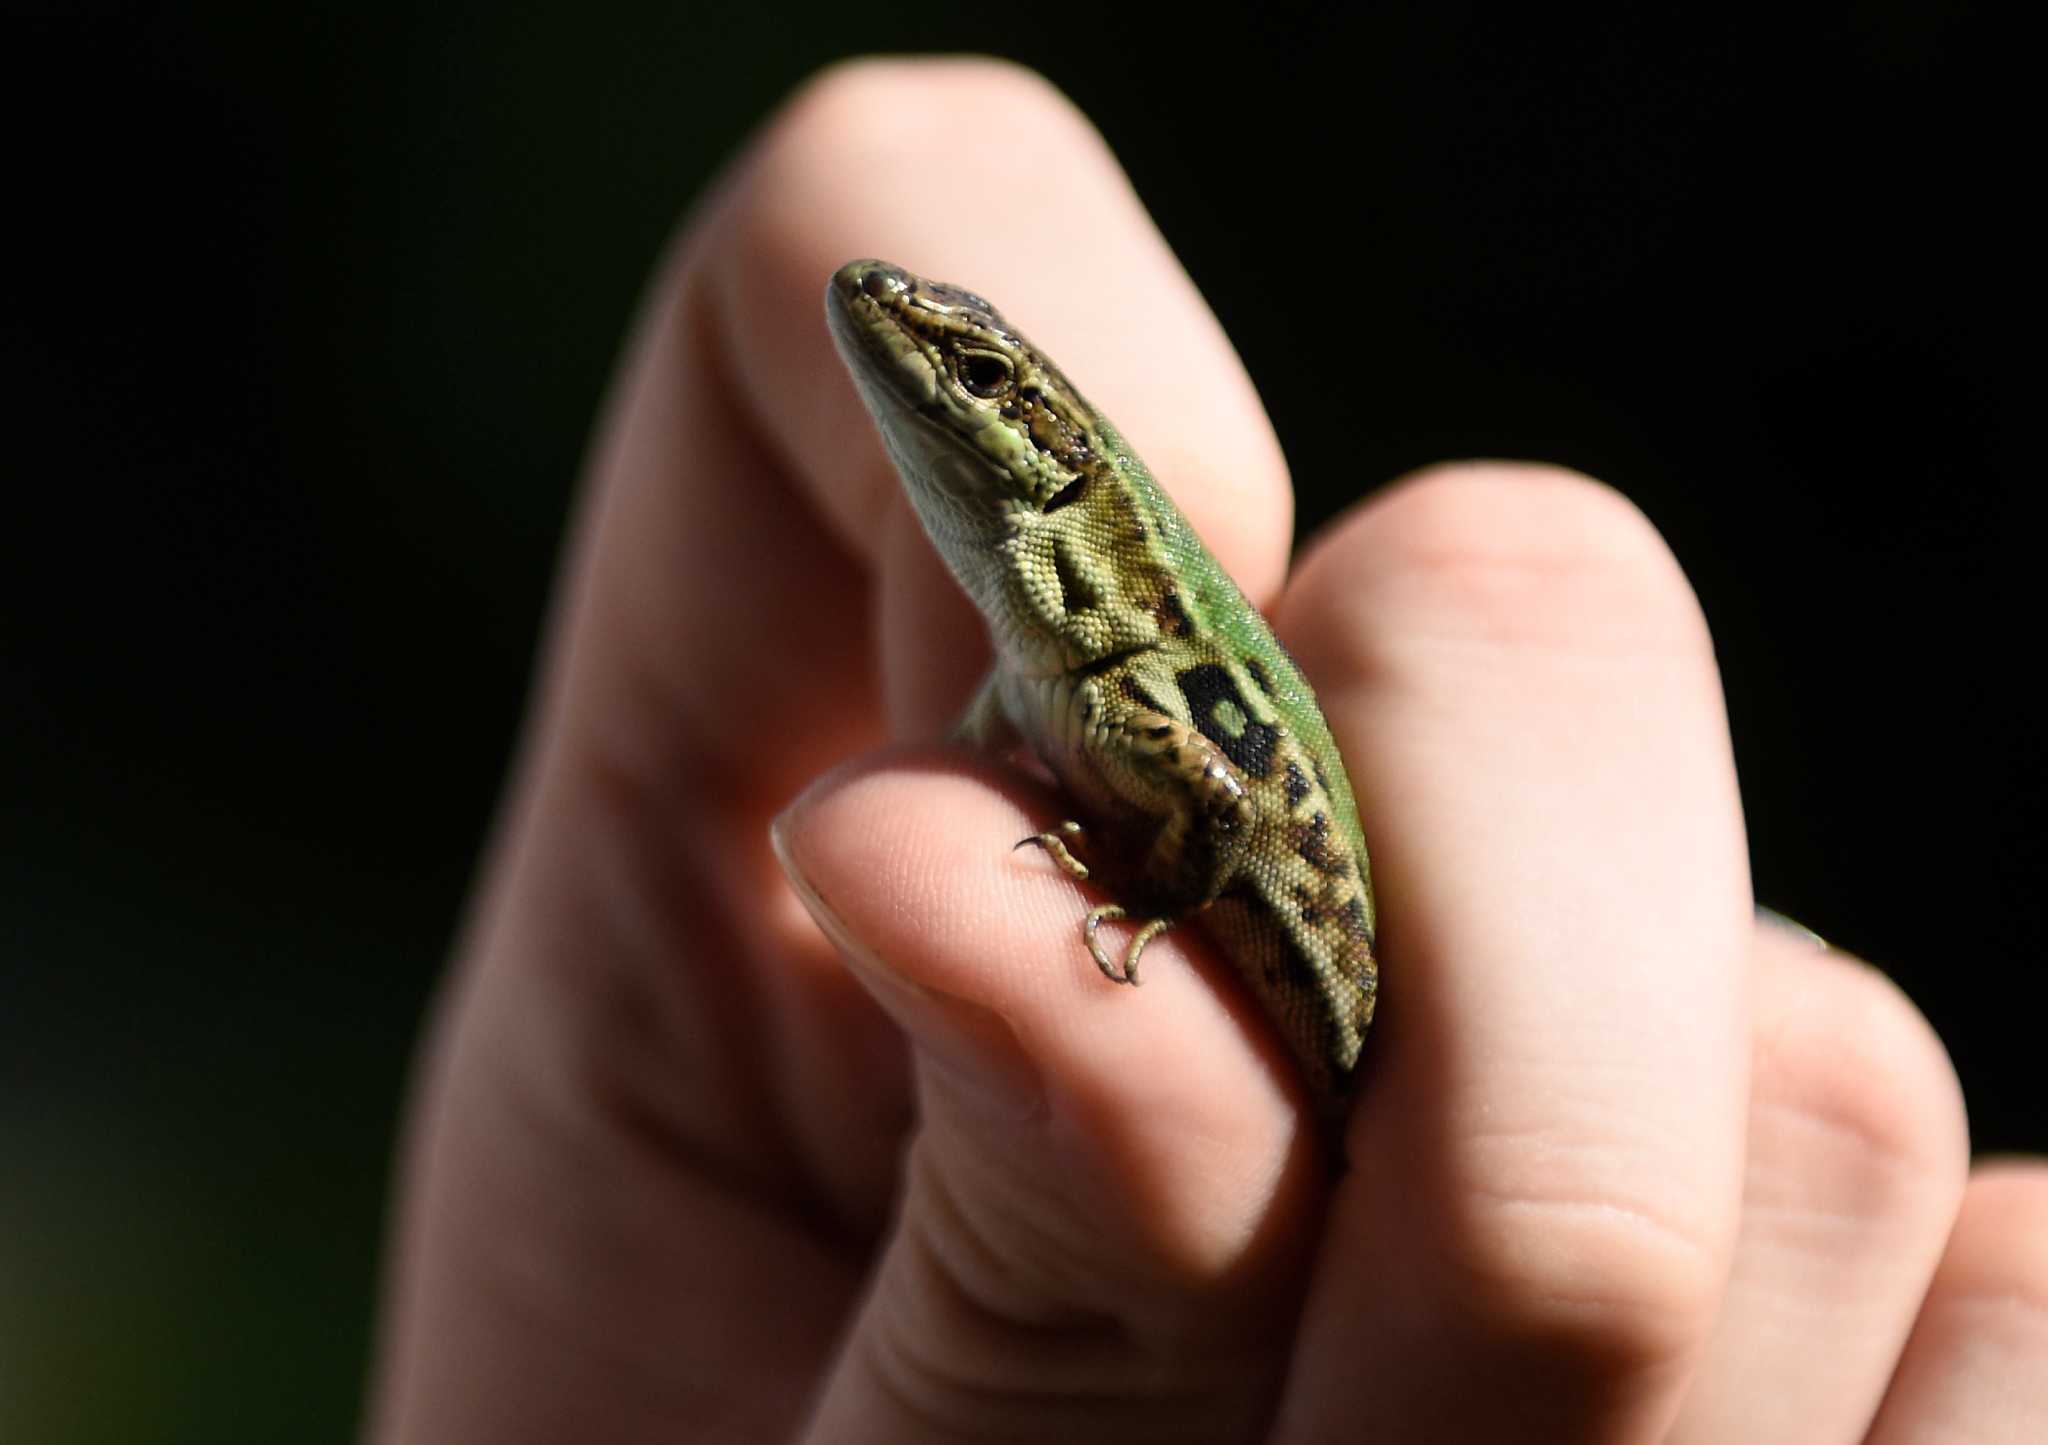 Scientists track reptiles' migration from New York to Greenwich